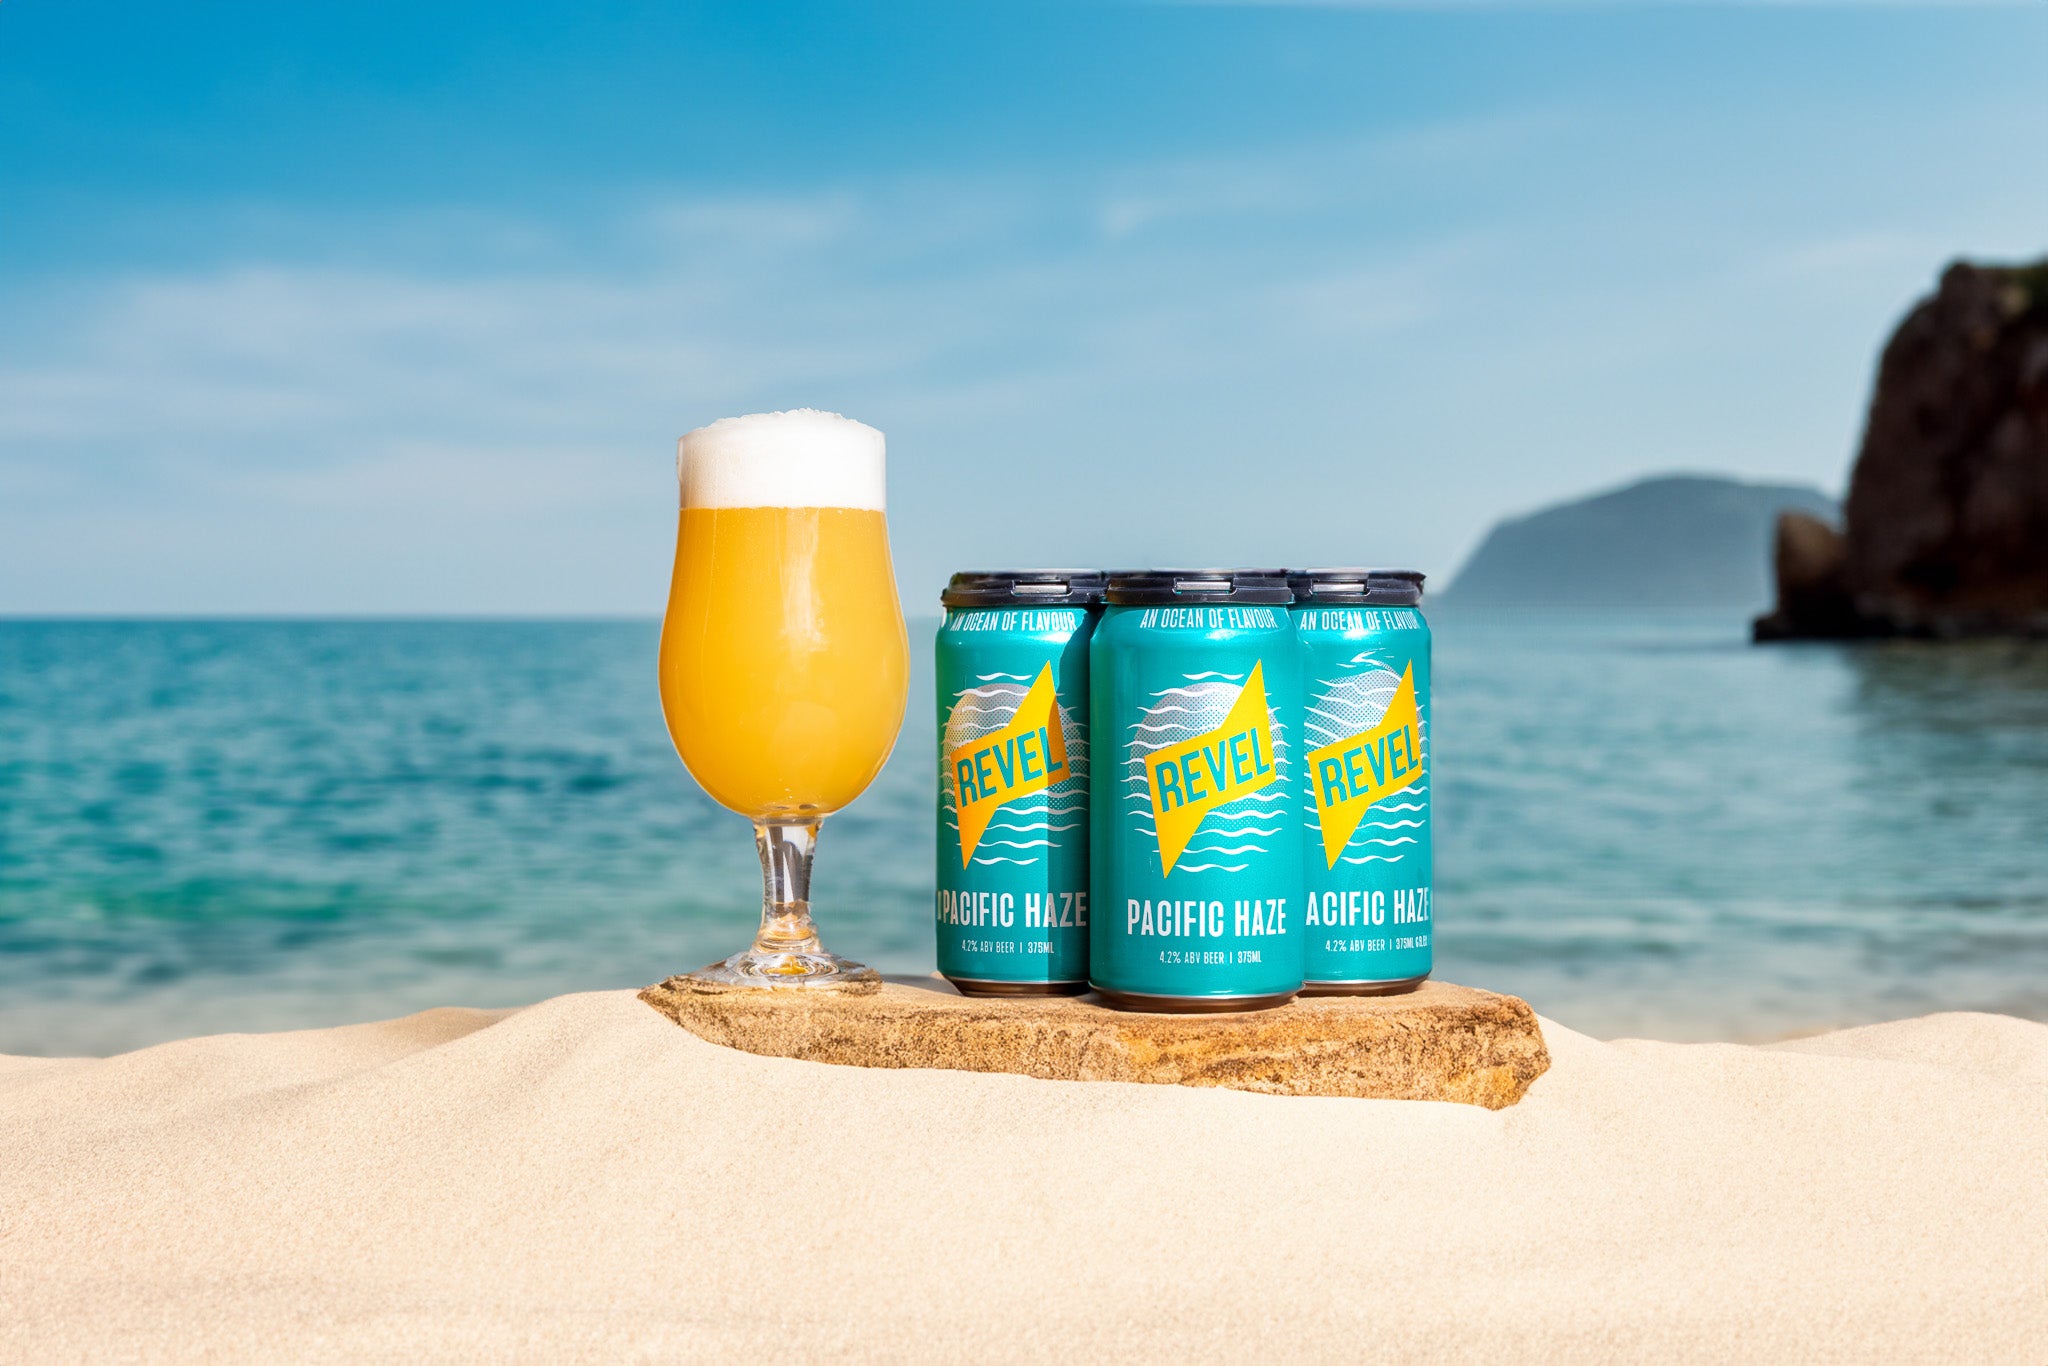 Revel Brewing Company Launches New Beer Product Inspired by the Pacific Ocean